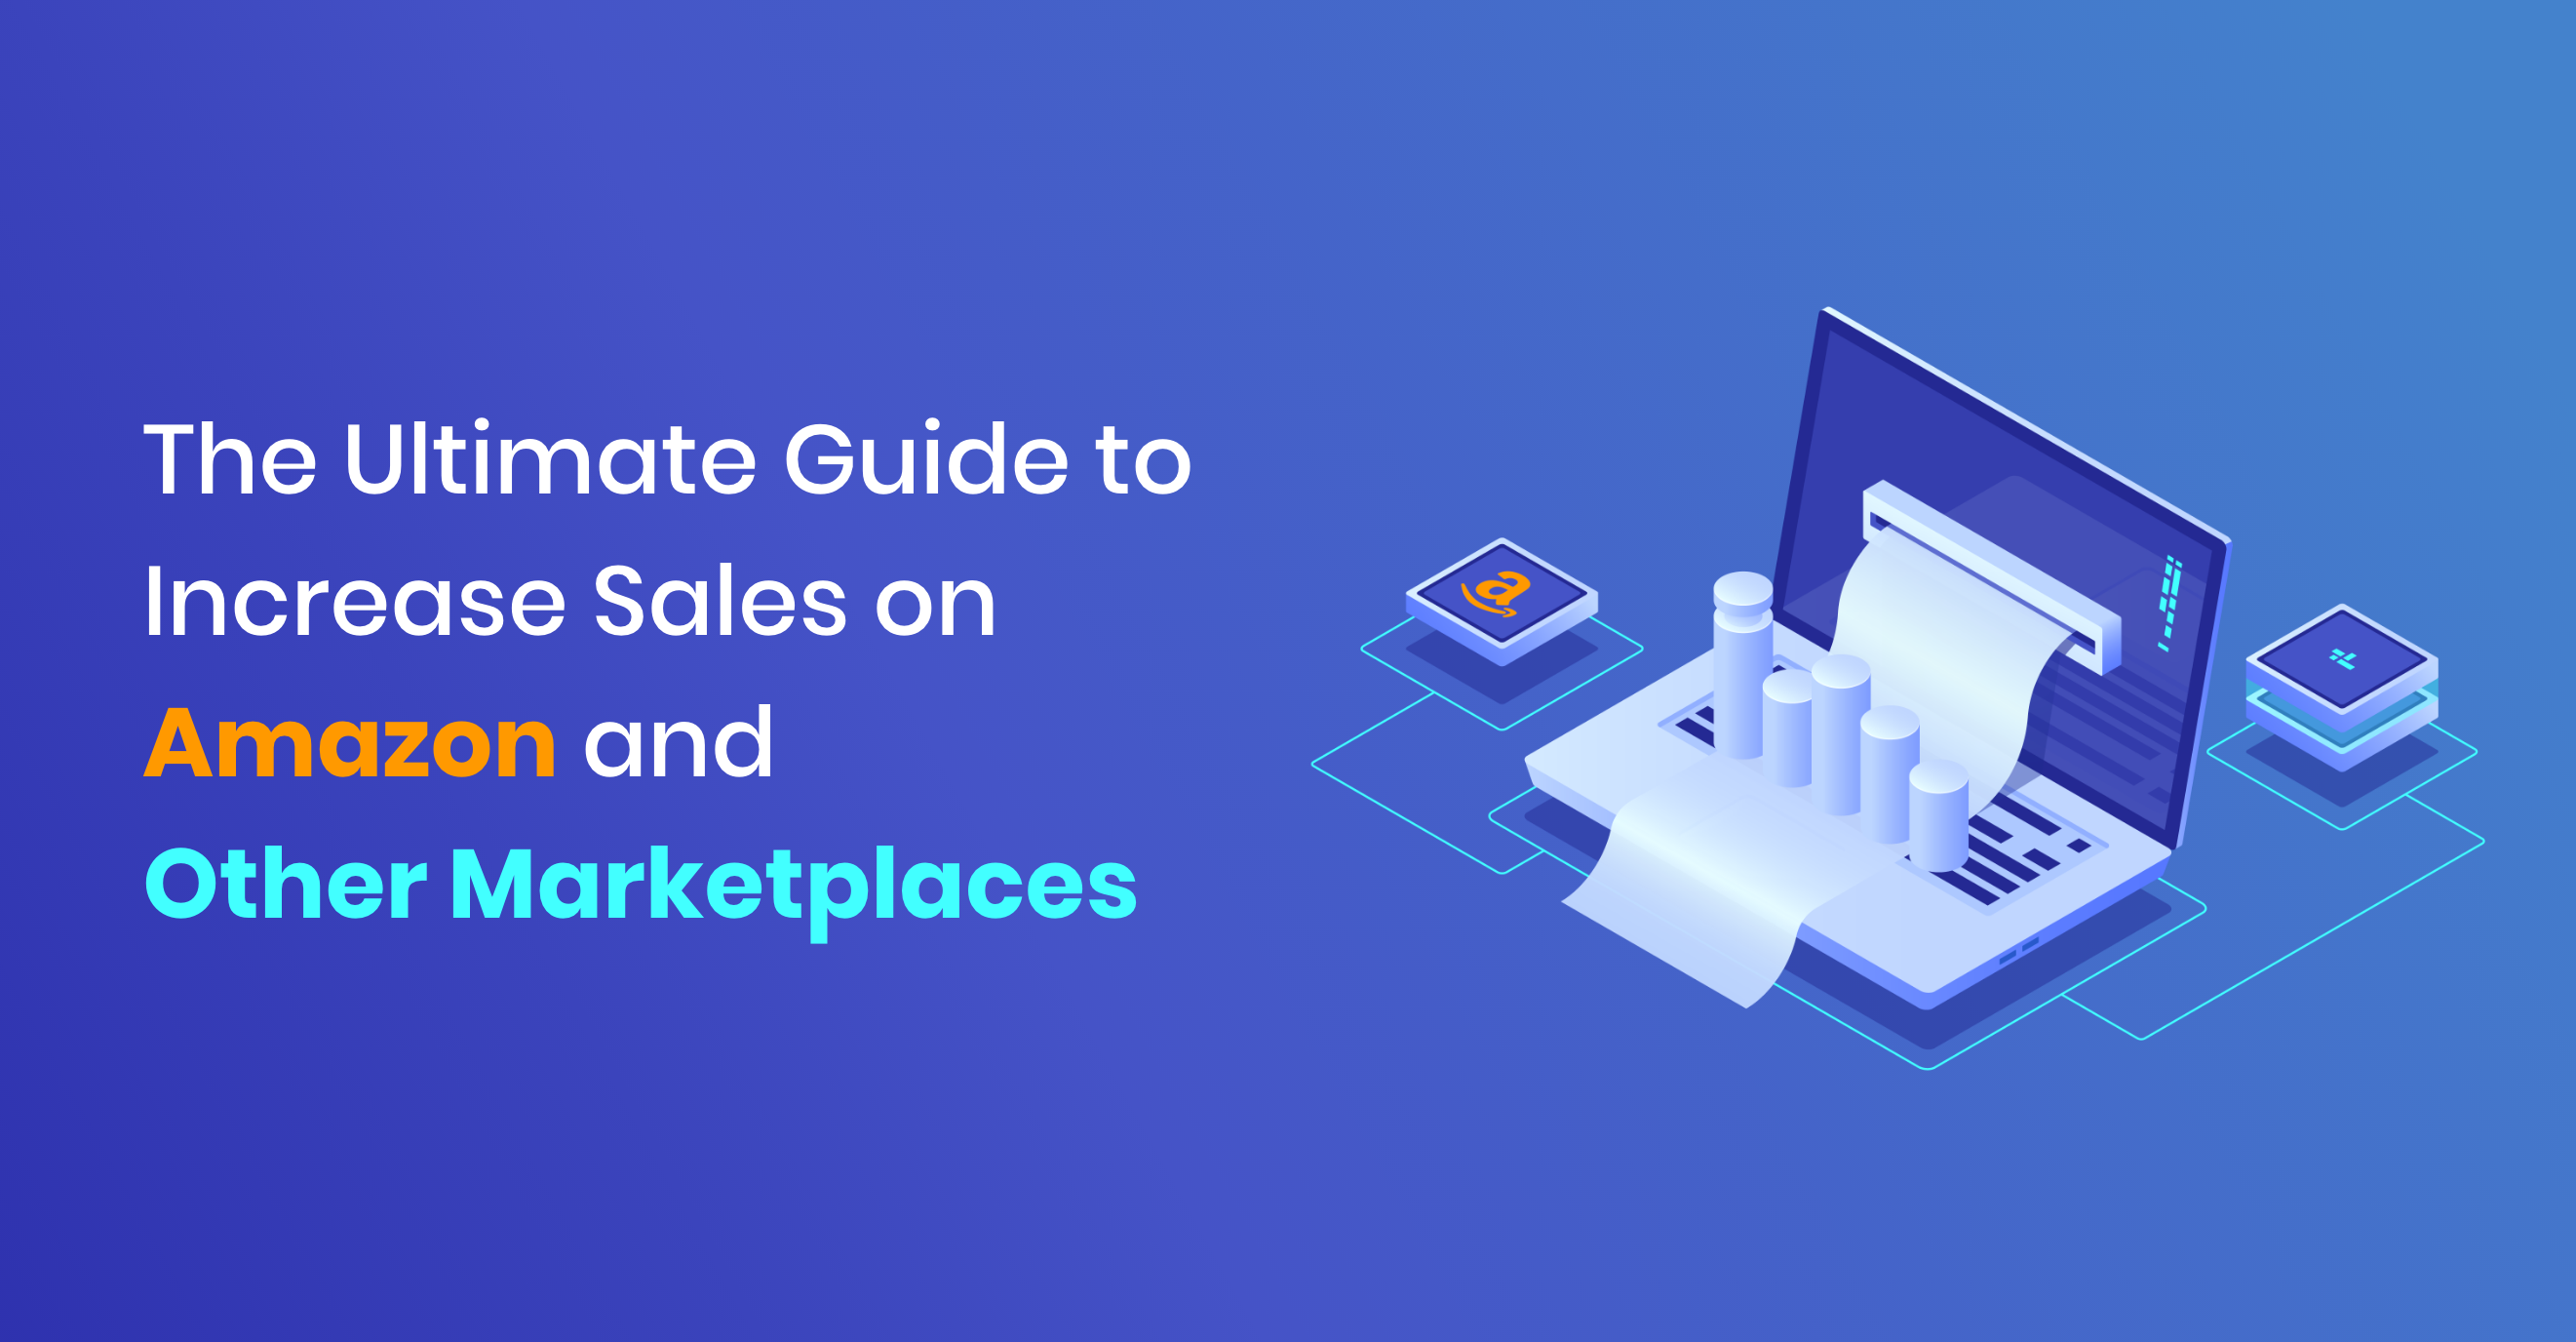 The Ultimate Guide to Increase Sales on Amazon and Other Marketplaces